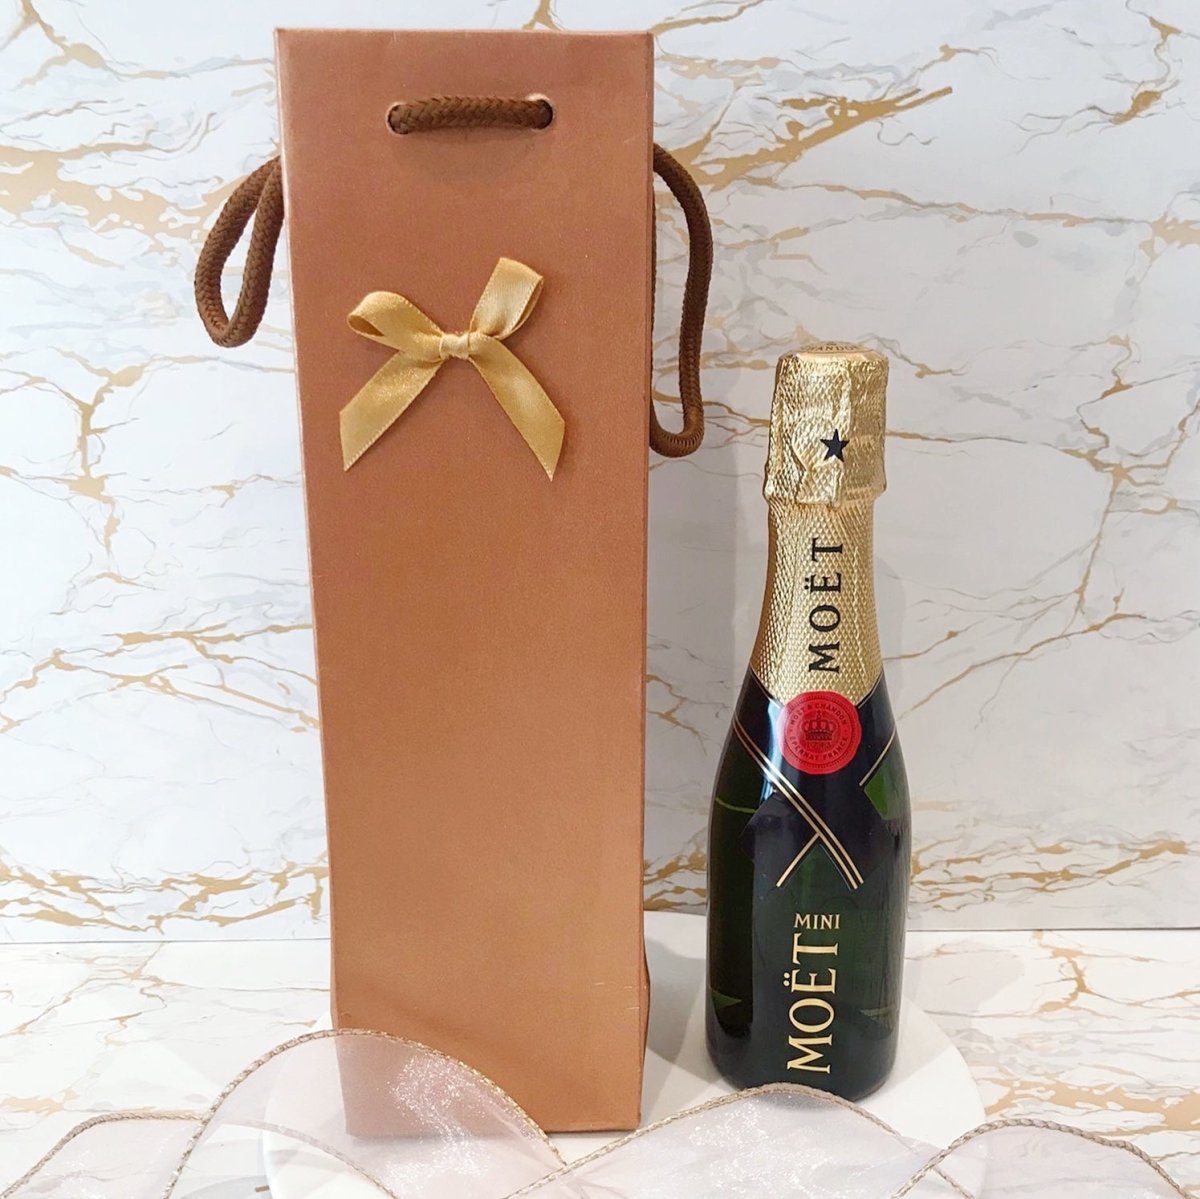 Mini Moet & Chandon Champagne - Brut Imperial 200ml (With Wine Bag, no box) - Rainbowly Fresh Fruit Gift and Flower Arrangments